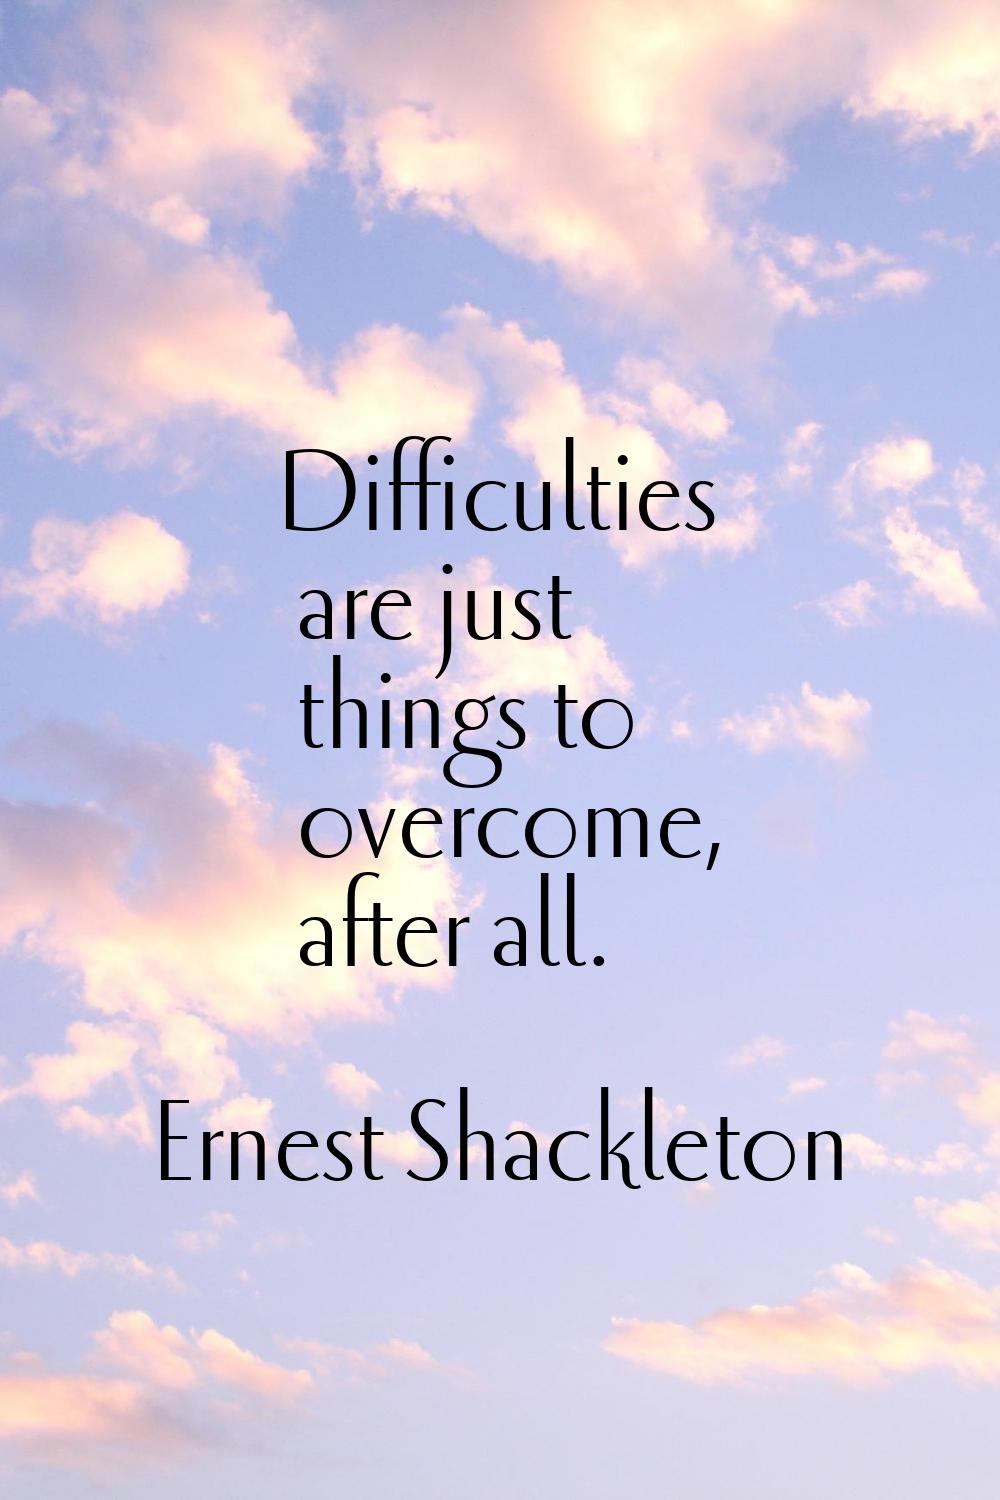 Difficulties are just things to overcome, after all.